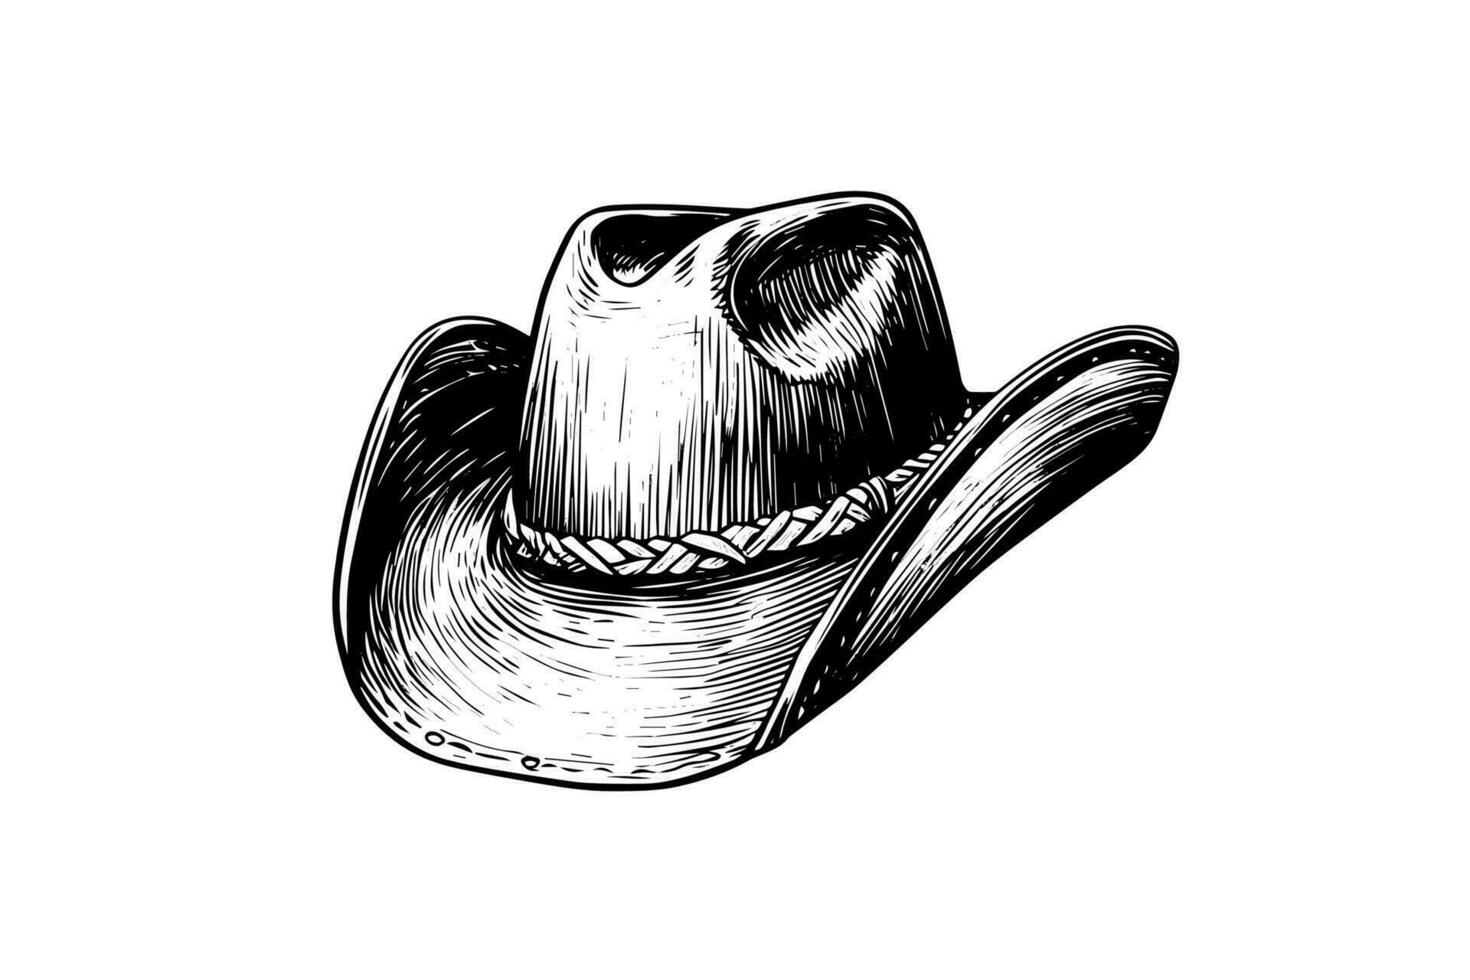 Cowboy or sheriff or farmer hat in engraving style. Hand drawn ink sketch. Vector illustration.